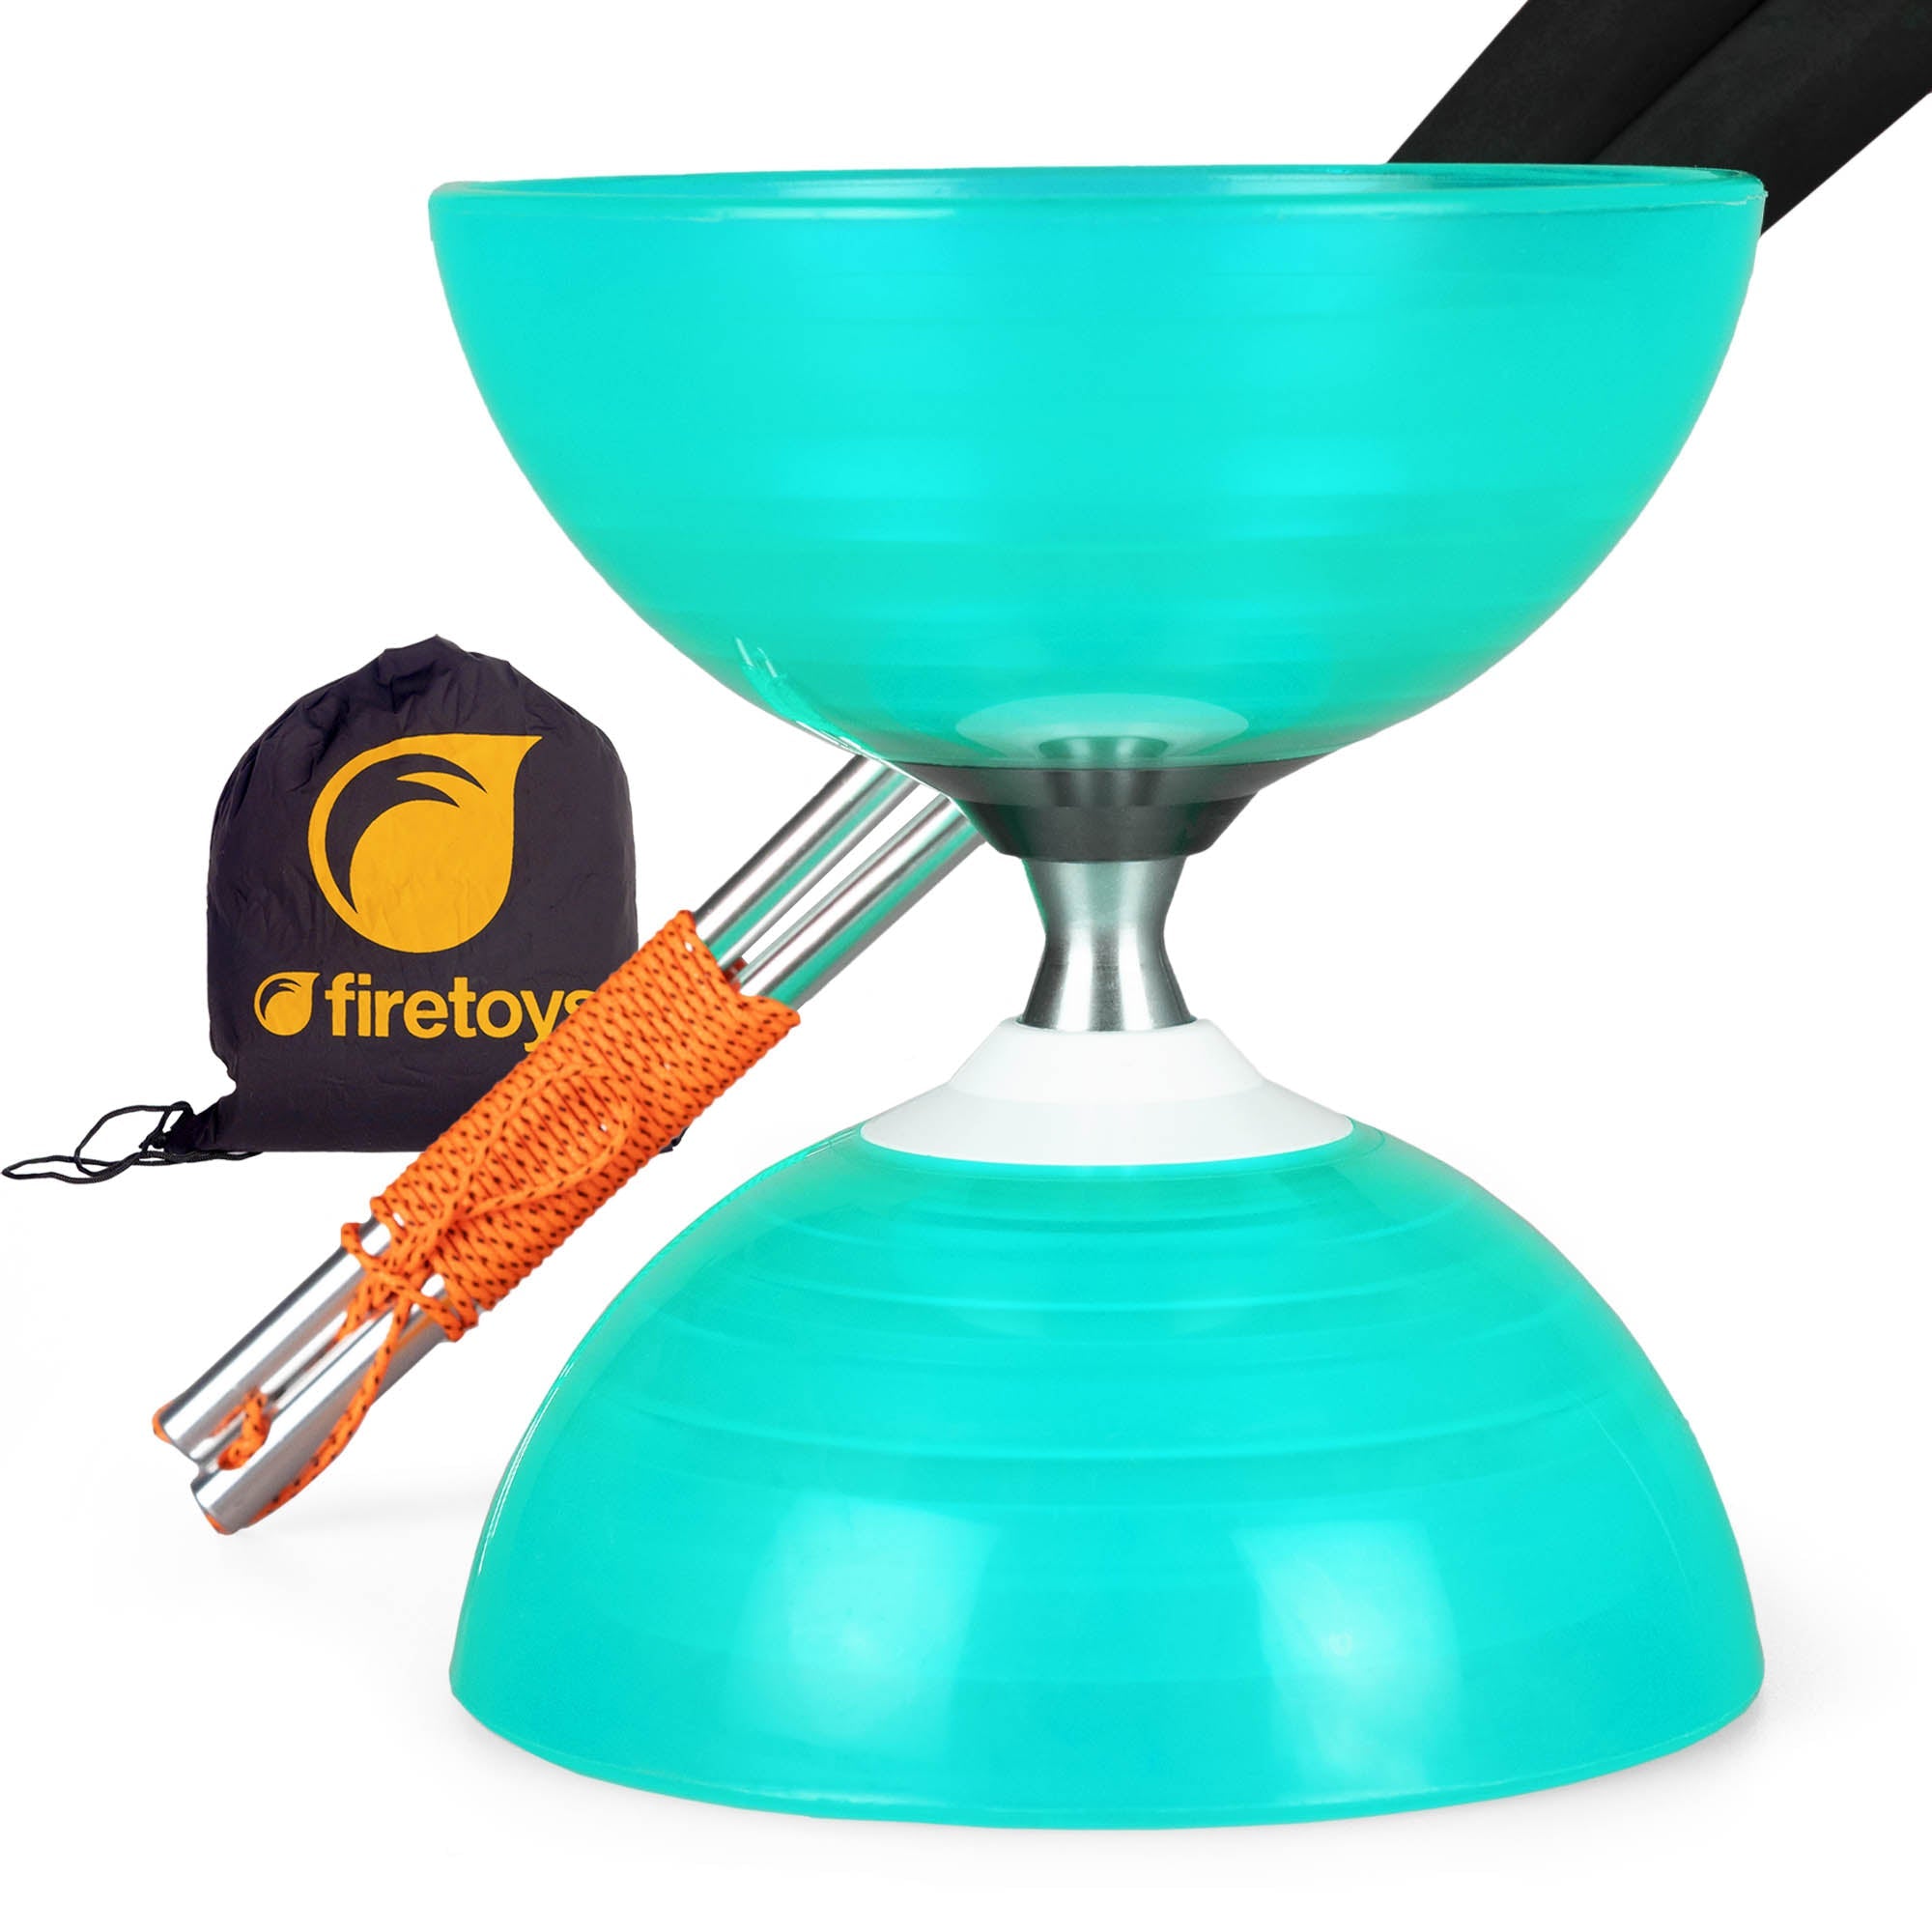 turquoise diabolo with sticks and bag